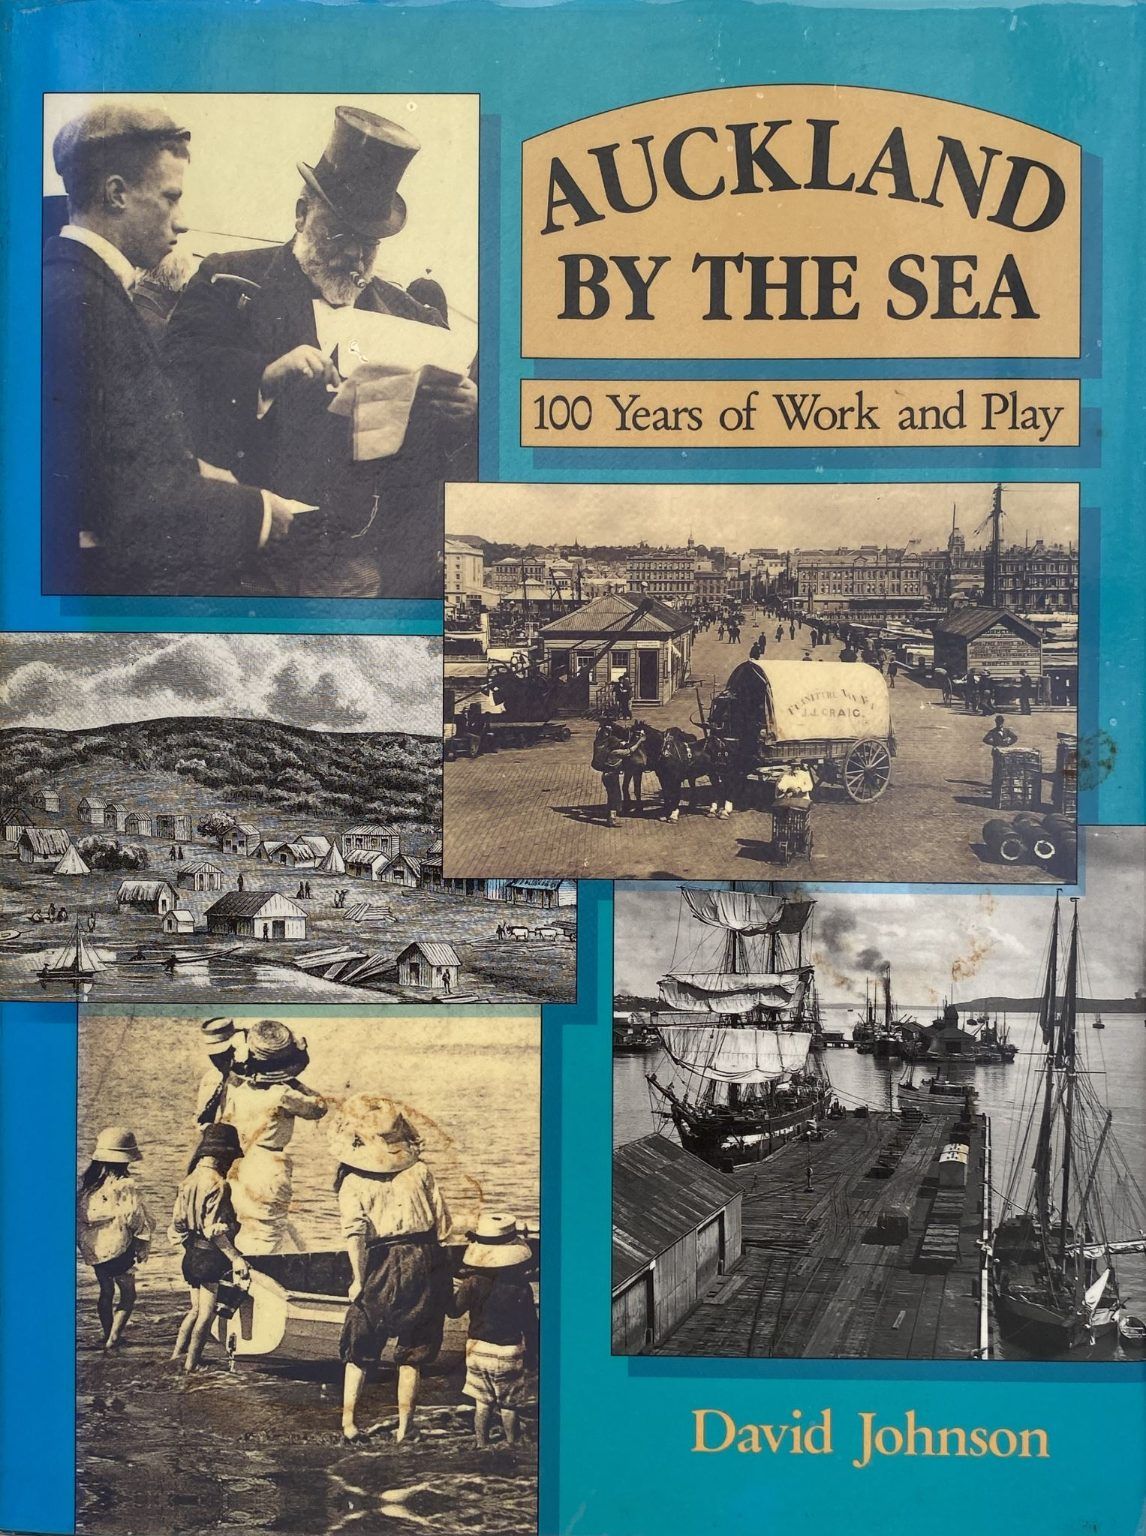 AUCKLAND BY THE SEA: 100 Years of Work and Play